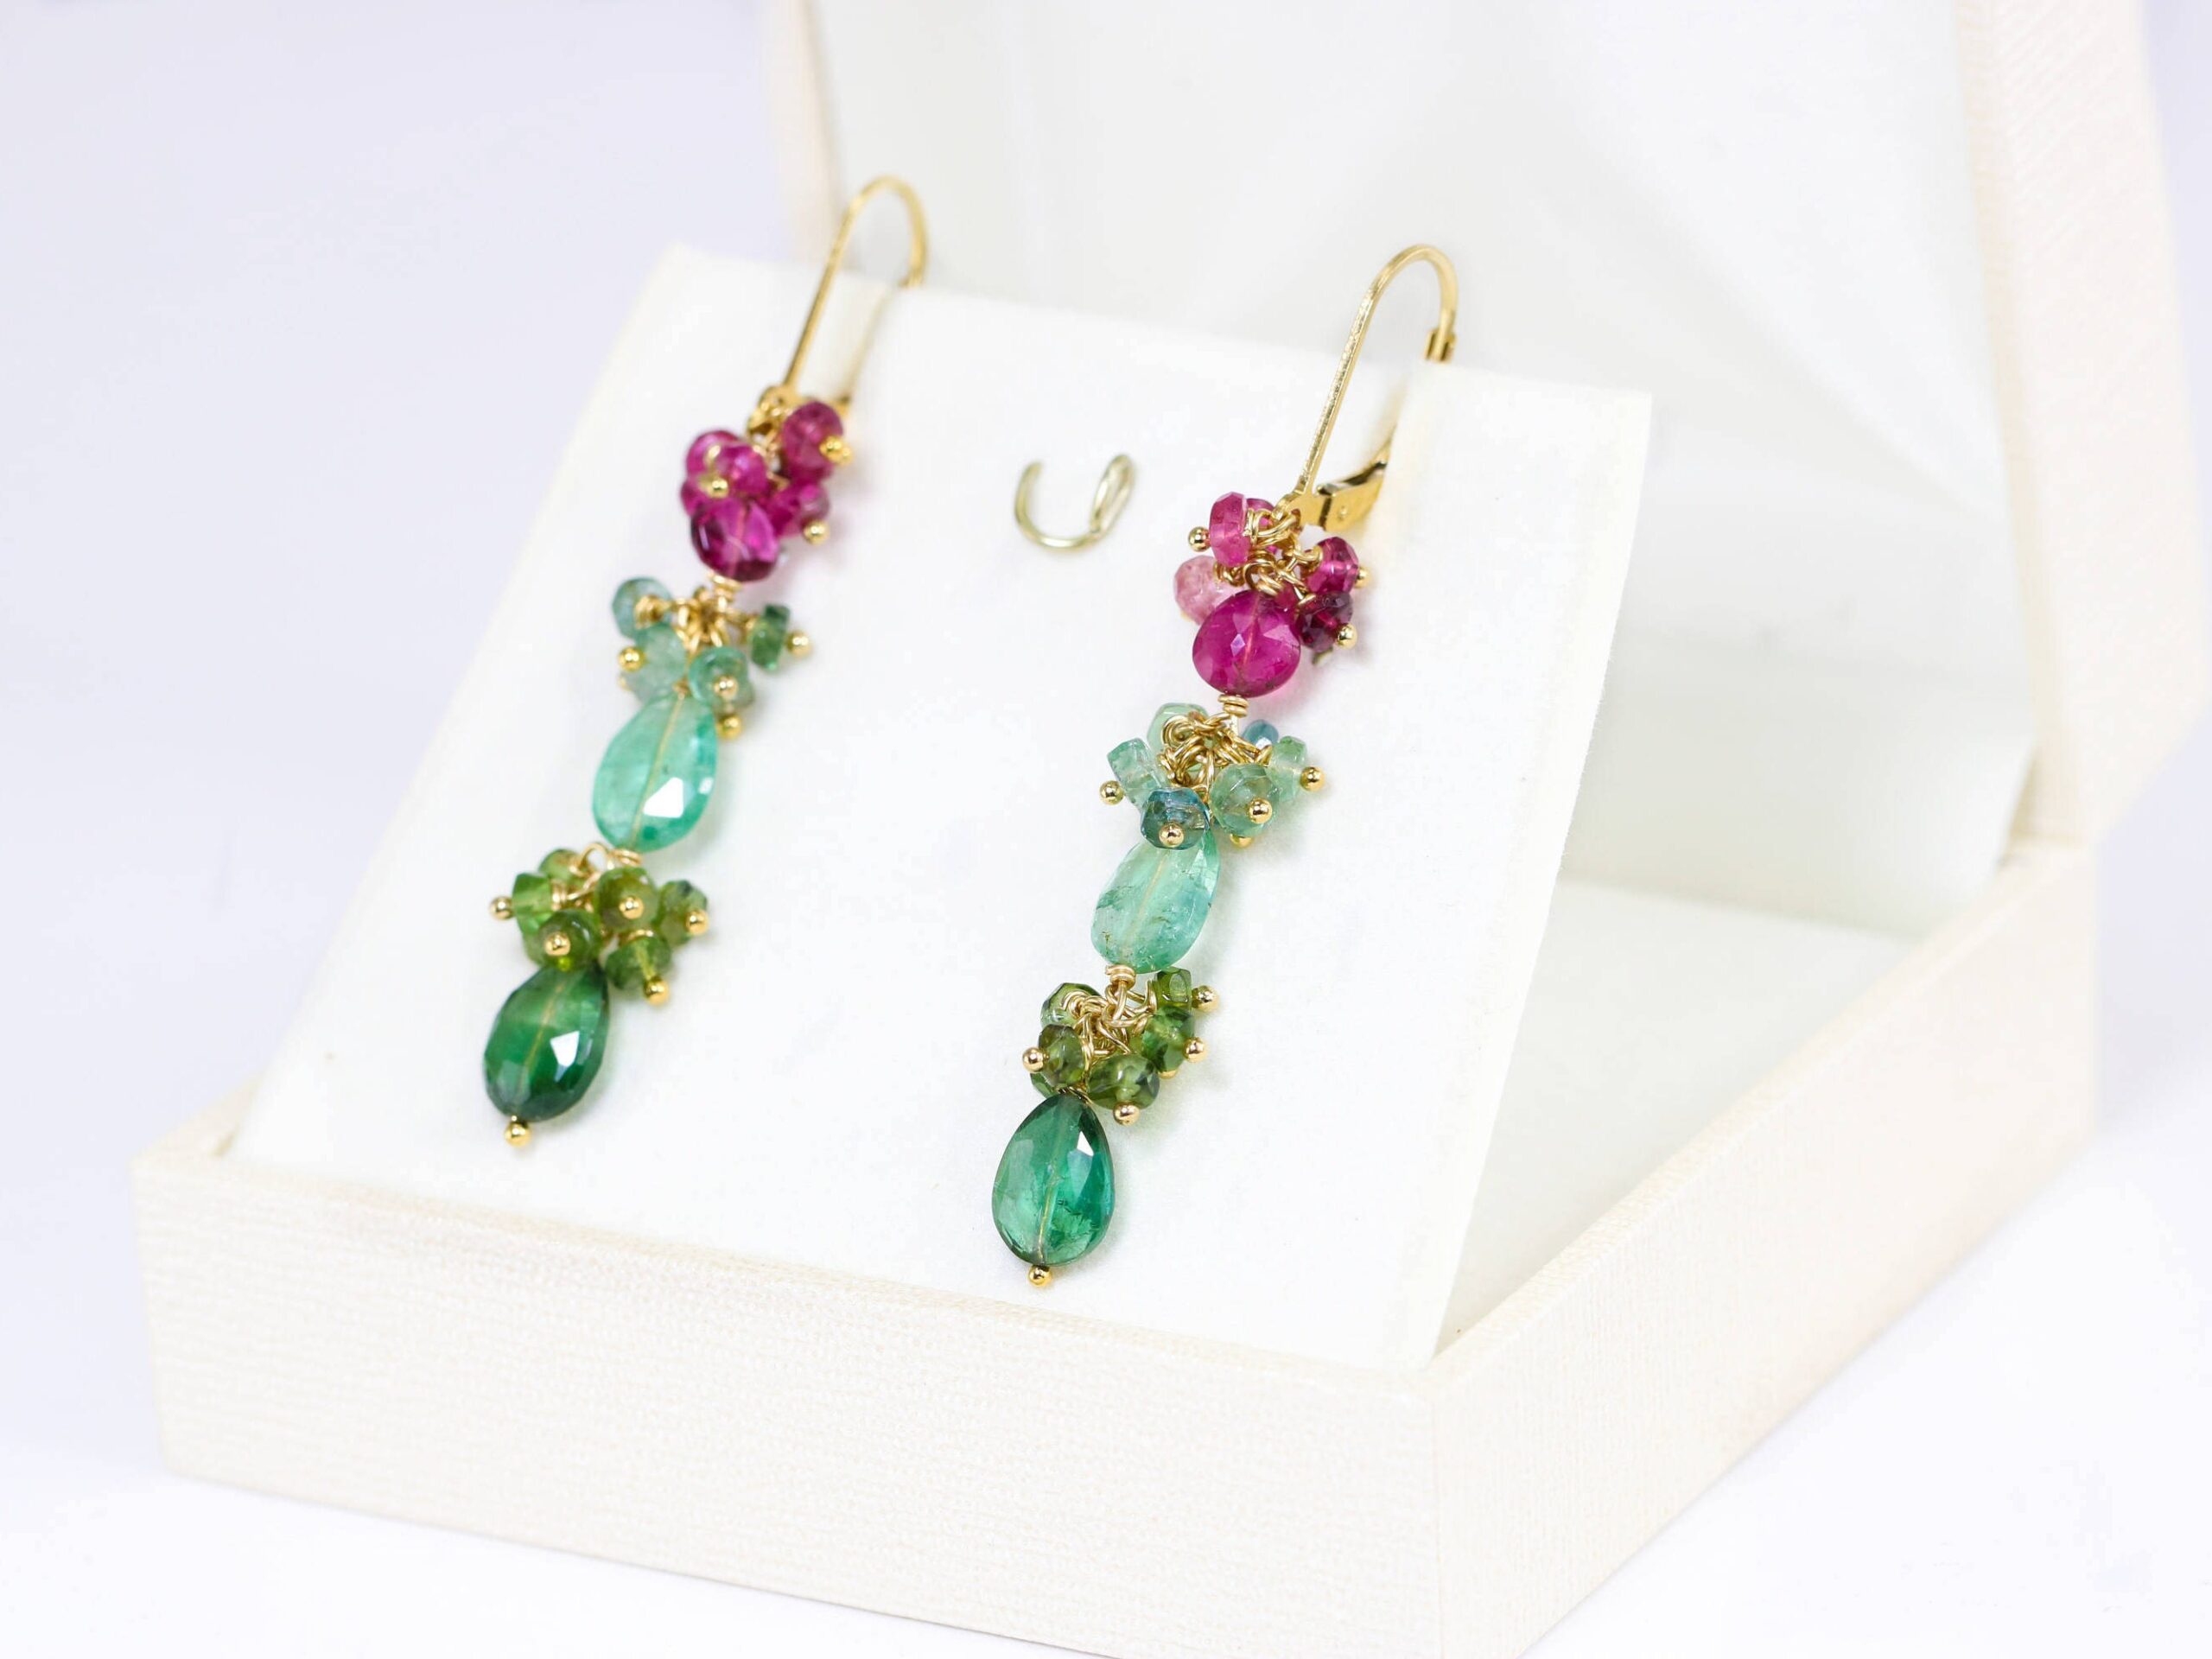 Pink, Green and Paraiba Teal Blue Tourmaline Dangle Earrings in Gold Filled